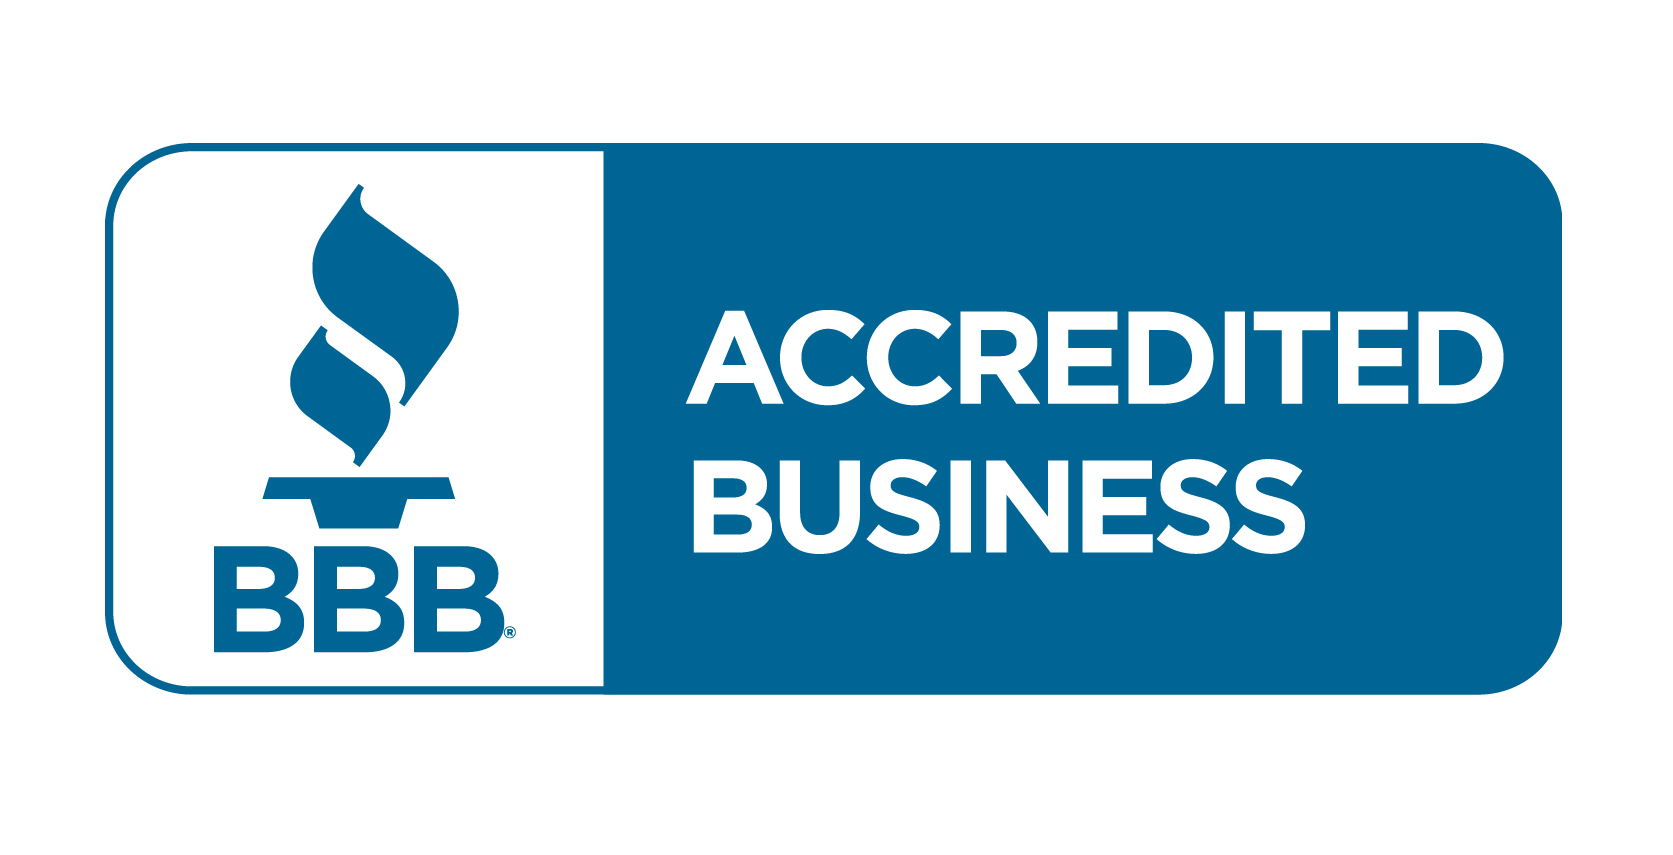 BBB Accredited Business | Lynch Carpet & Flooring